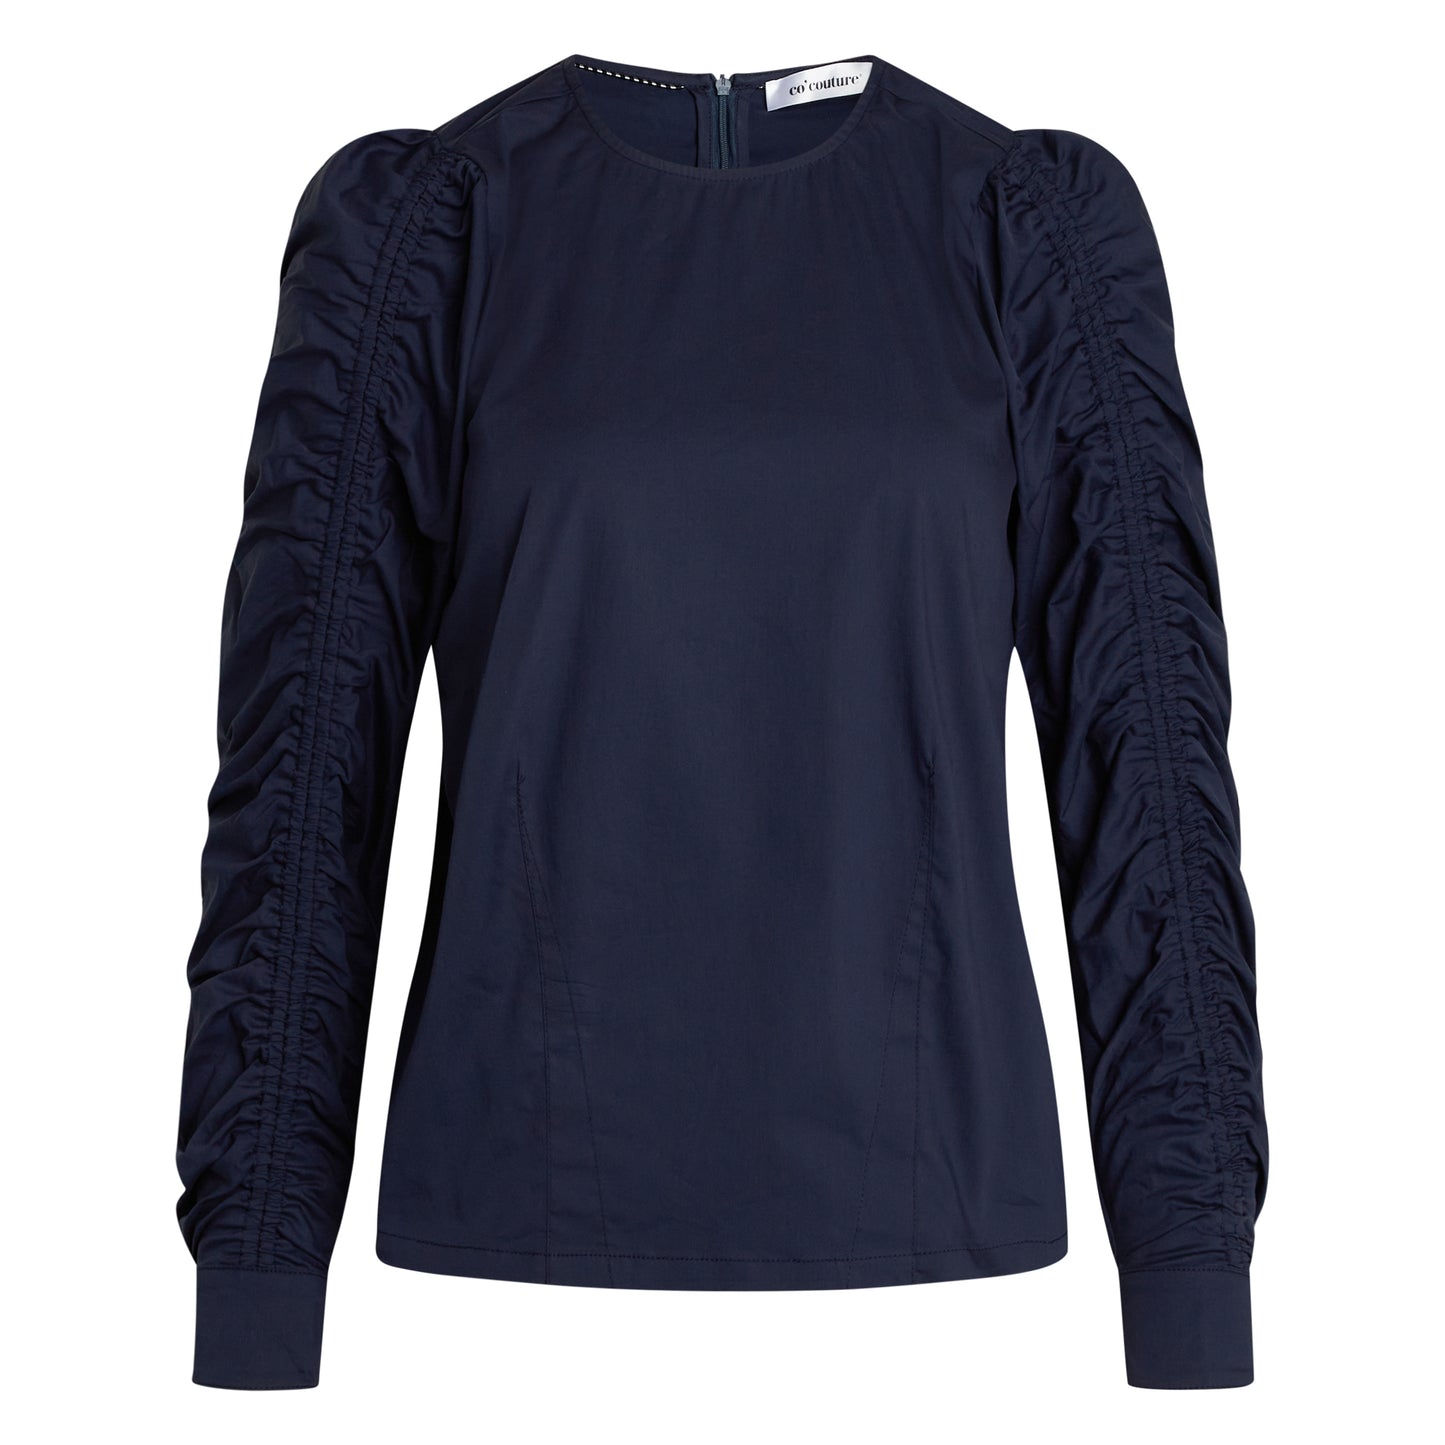 Co'couture - Sandy Shirt - Navy